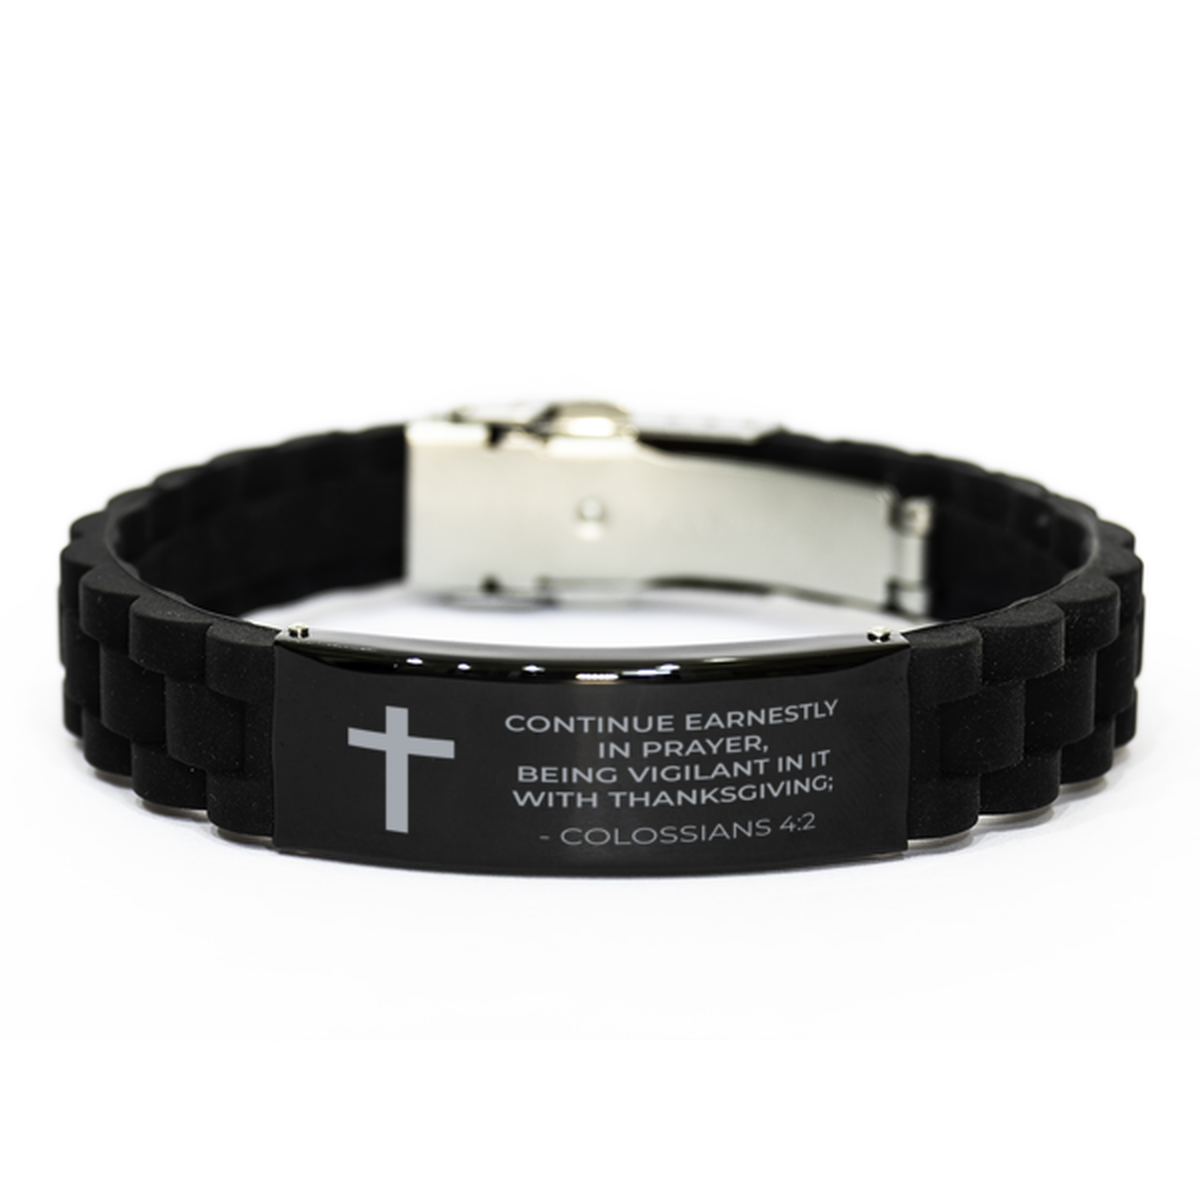 Bible Verse Black Bracelet,, Colossians 4:2 Continue Earnestly In Prayer, Being Vigilant In, Inspirational Christian Gifts For Men Women